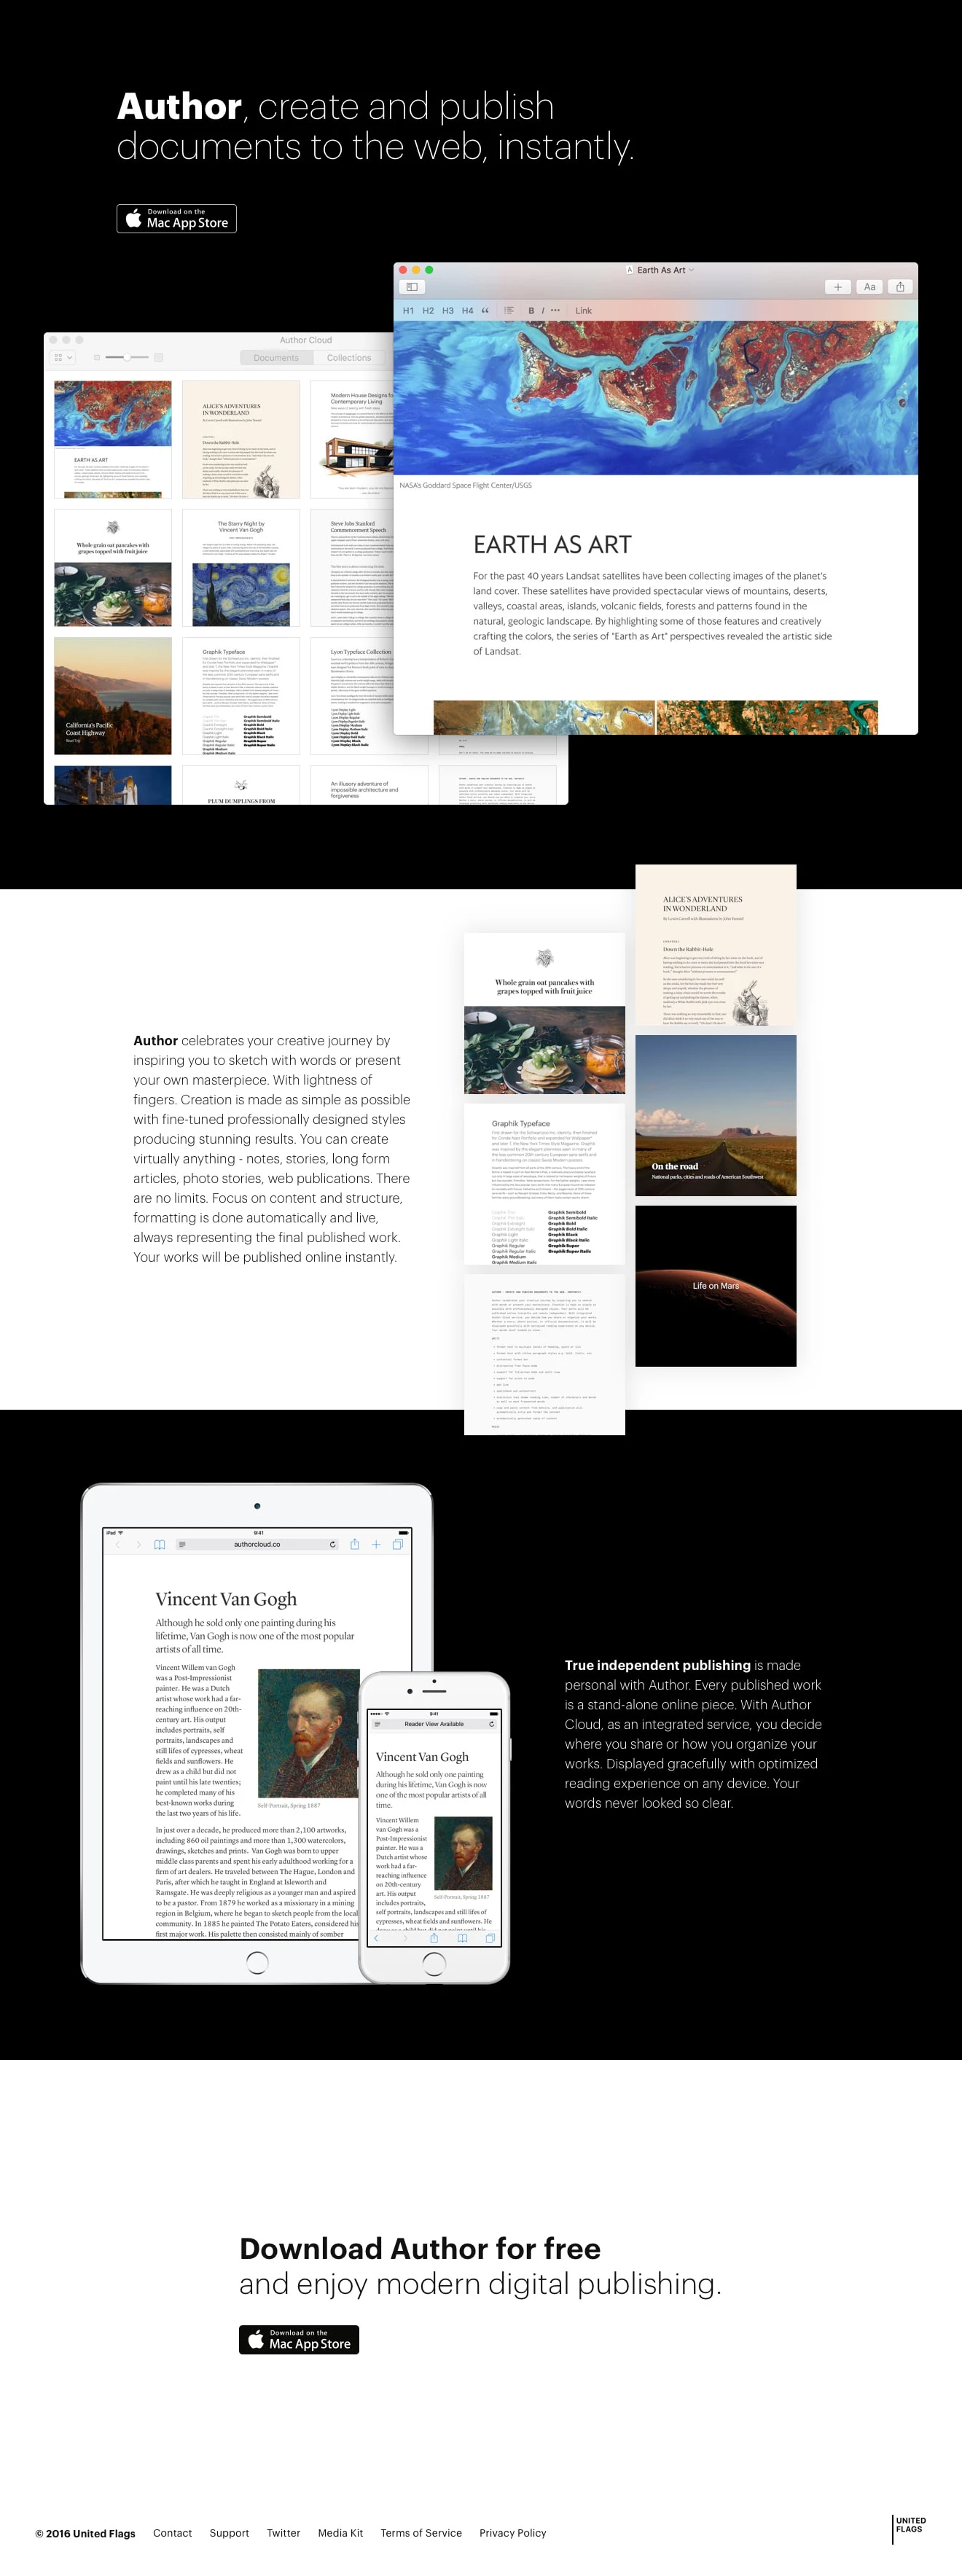 Author Landing Page Example: Mac app that changes how you can create and publish documents to the web.